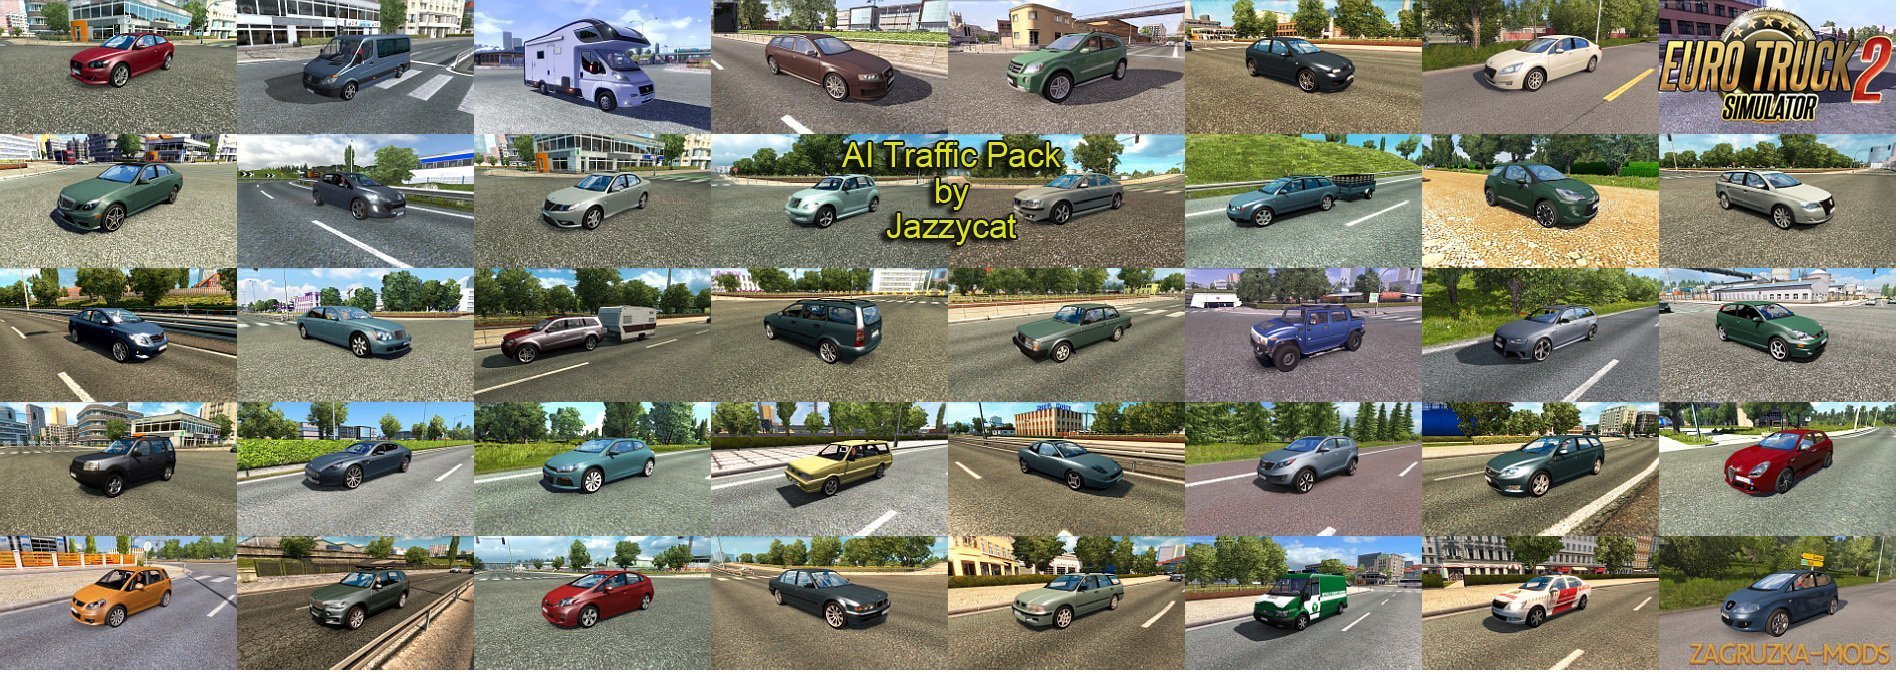 AI Traffic Pack v4.0.1 by Jazzycat [1.26.x]